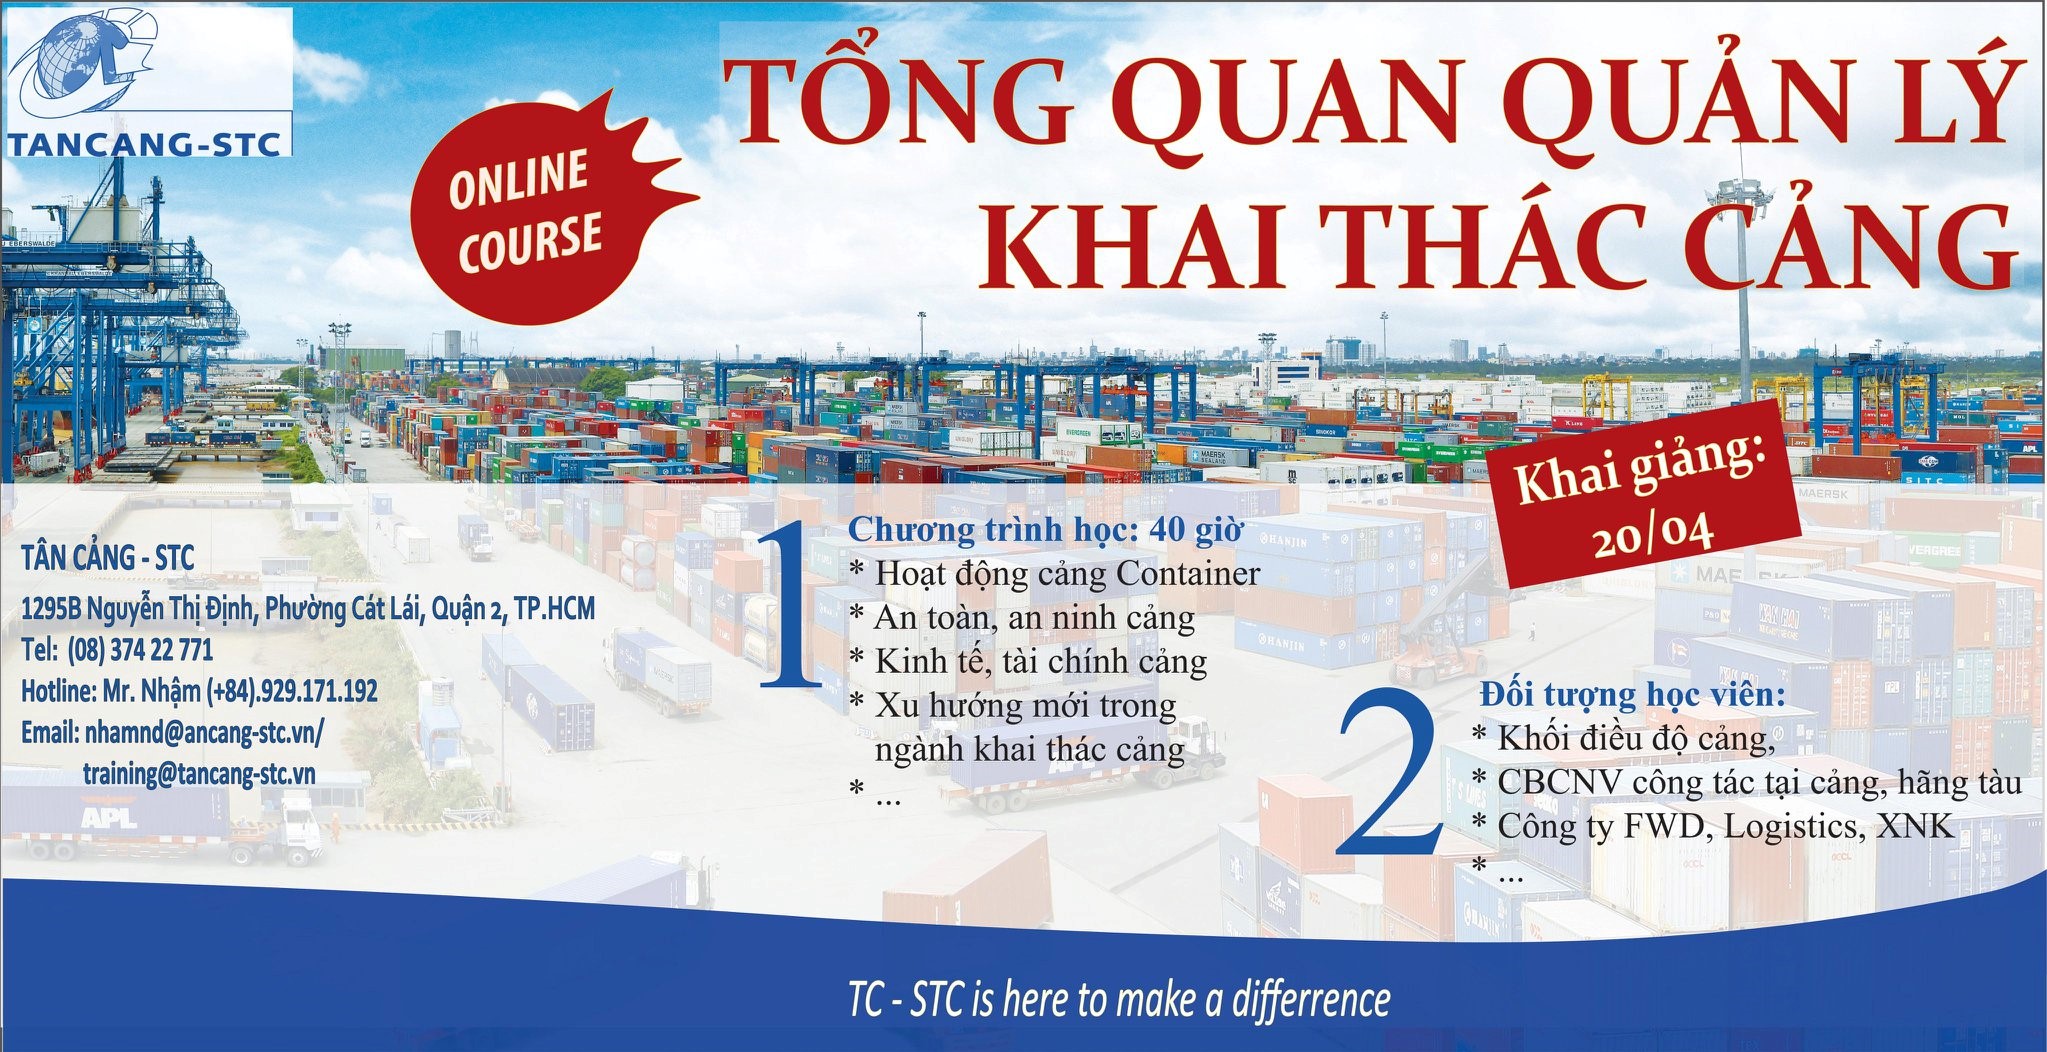 The online course at Tan Cang-STC